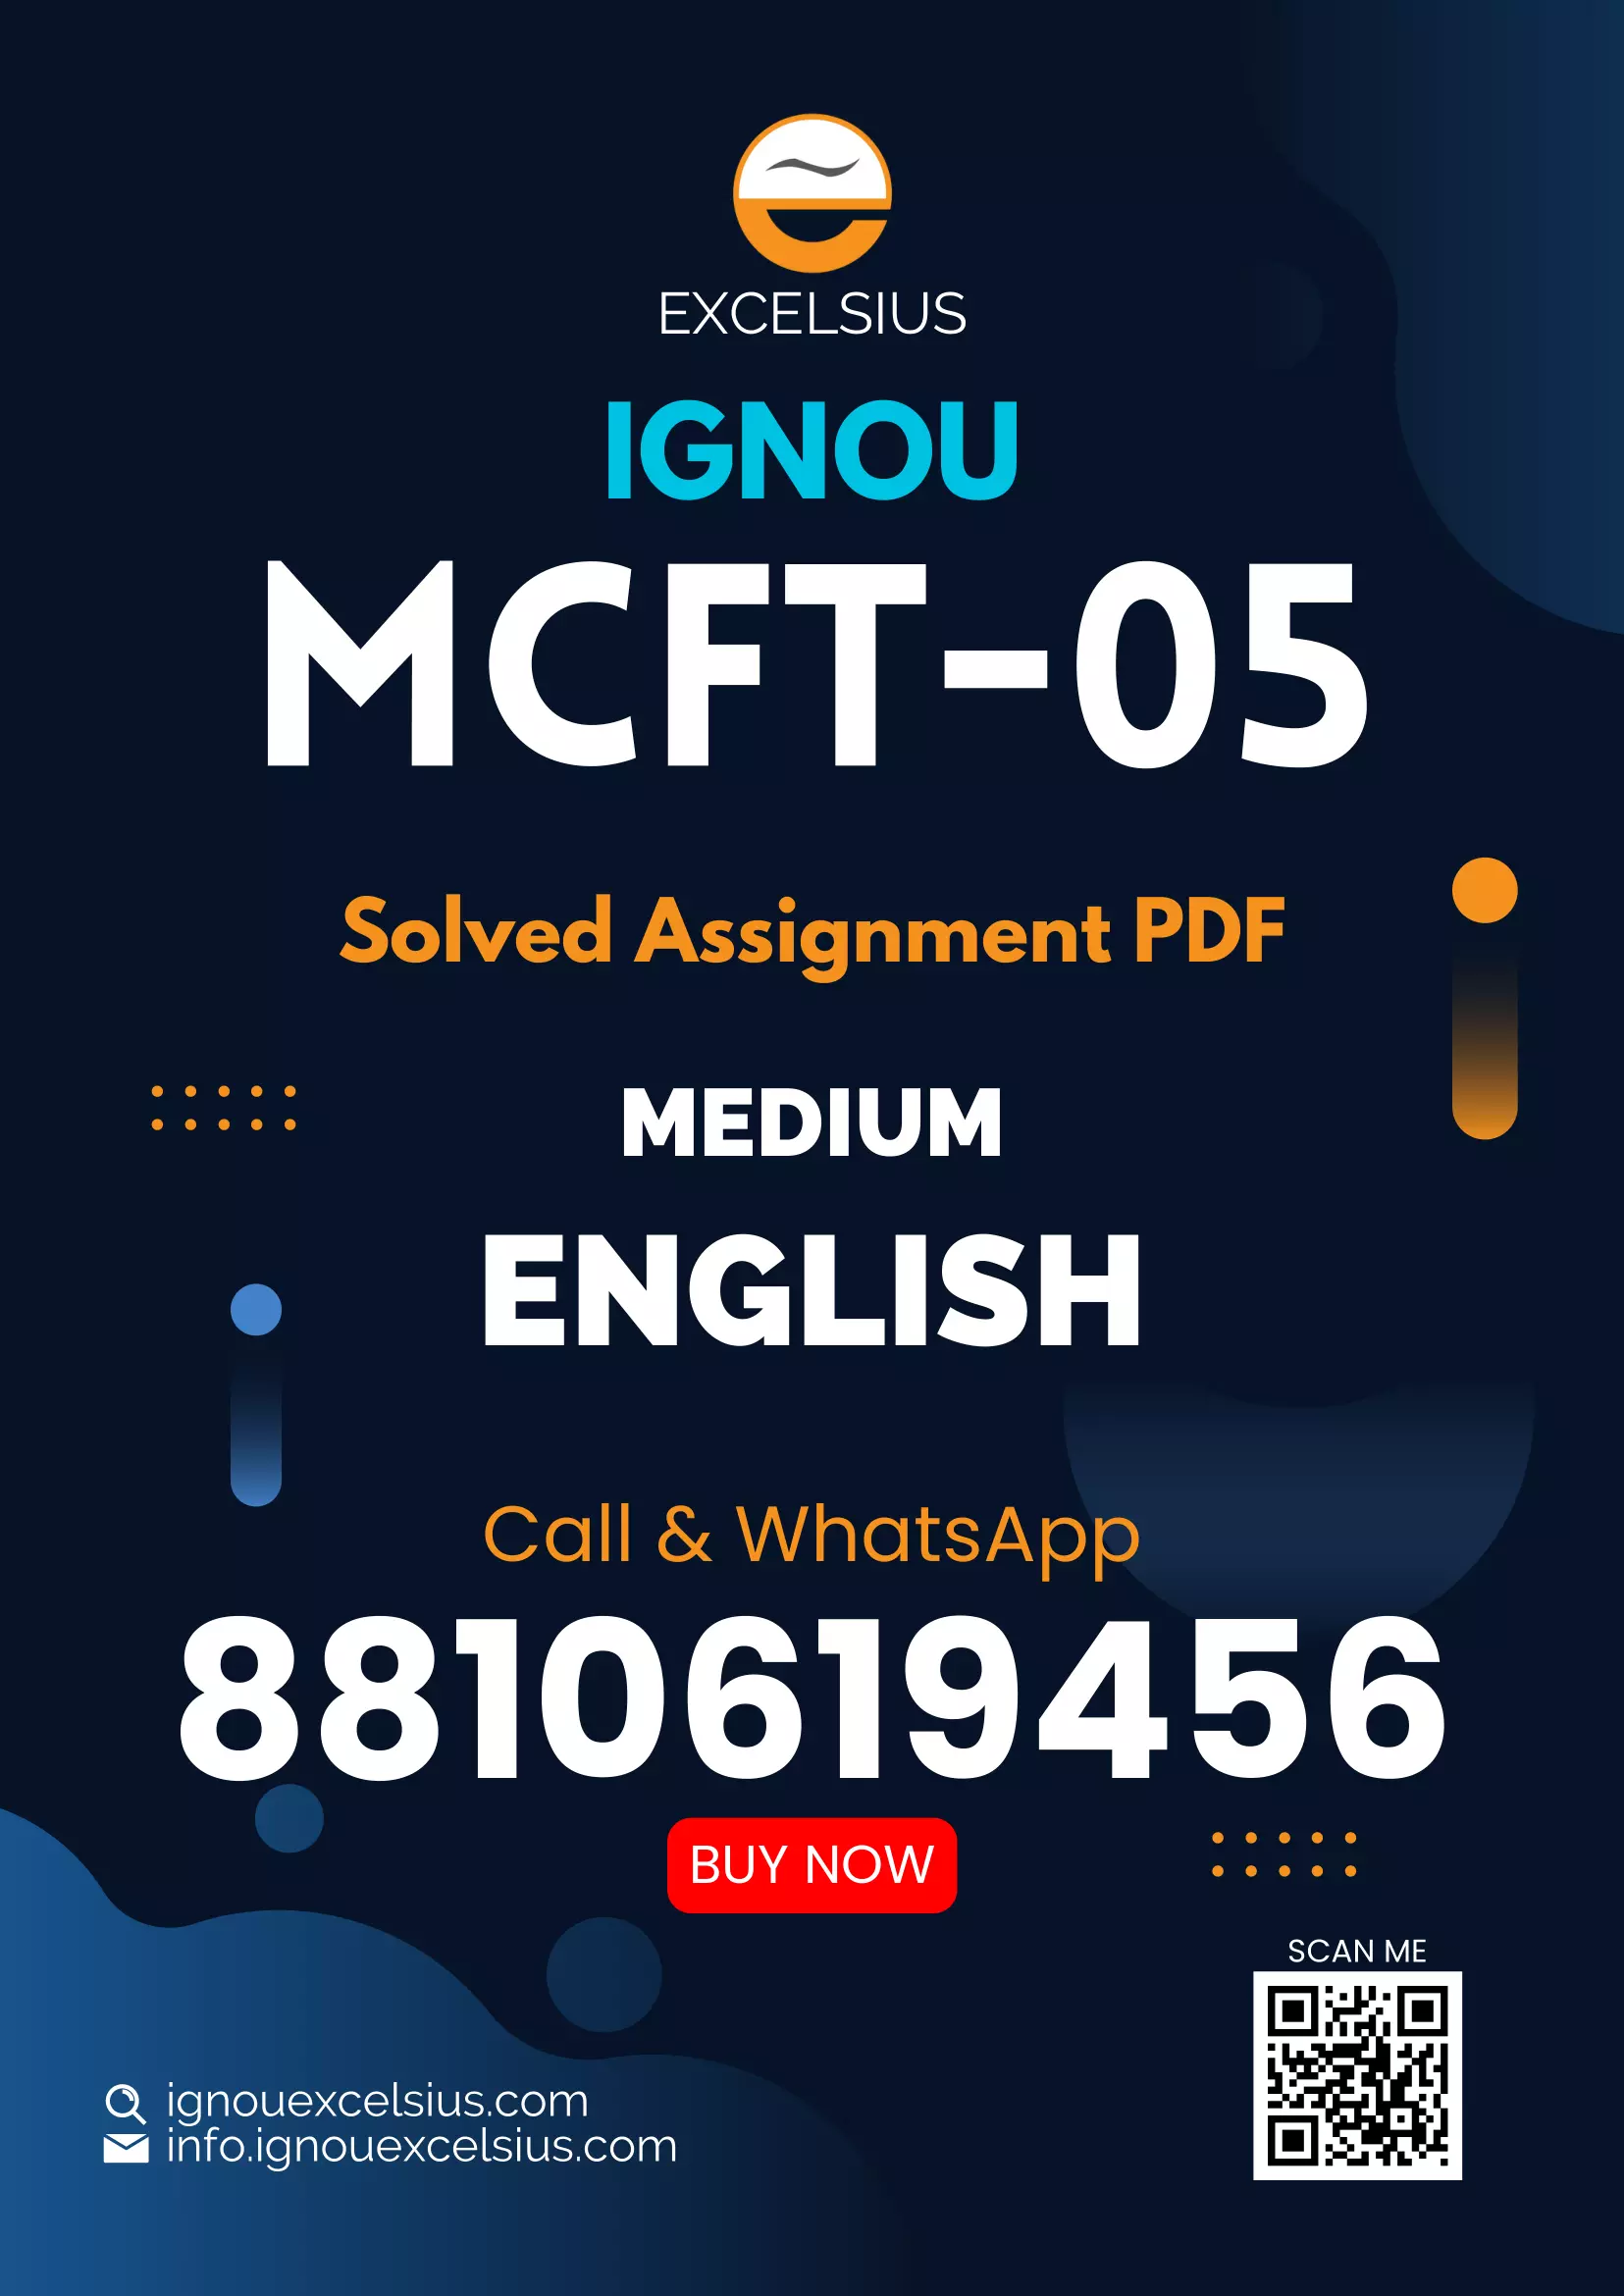 IGNOU MCFT-05 - Counselling and Family Therapy: Research Methods and Statistics, Latest Solved Assignment-July 2023 - January 2024